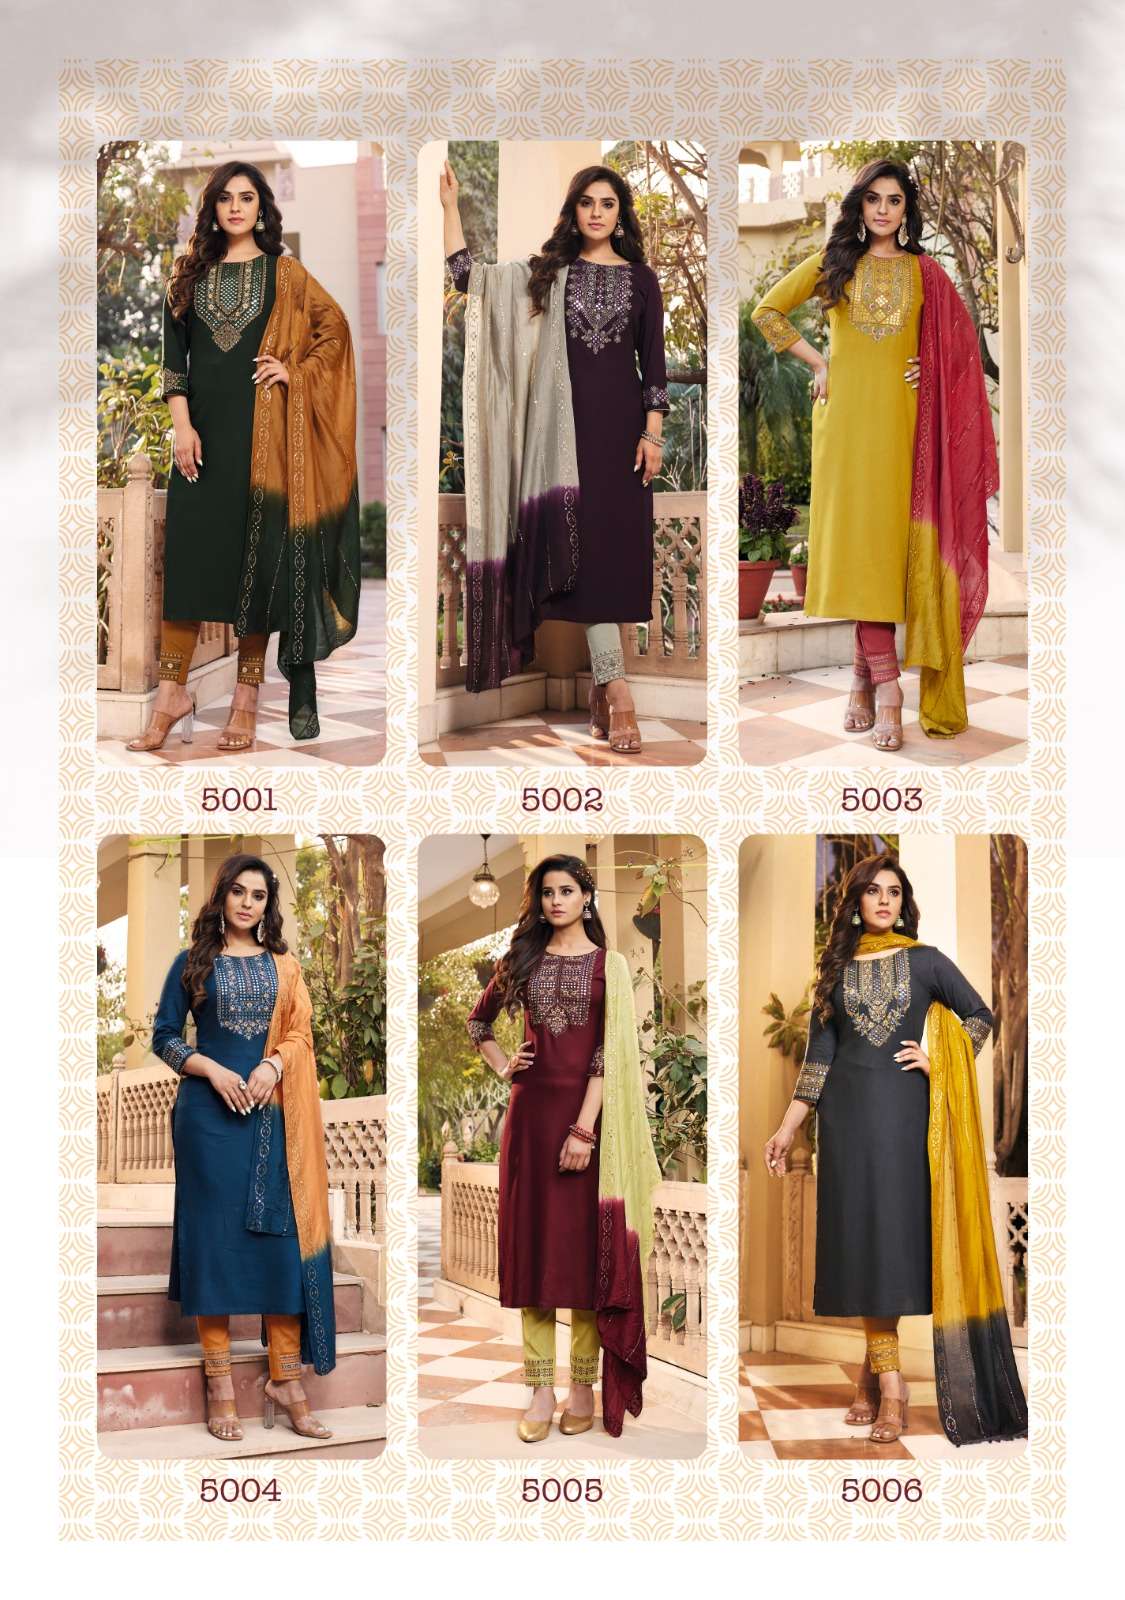 Kashish Vol-5 By Ladies Flavour 5001 To 5006 Series Beautiful Sharara Suits Colorful Stylish Fancy Casual Wear & Ethnic Wear Pure Rayon Embroidered Dresses At Wholesale Price